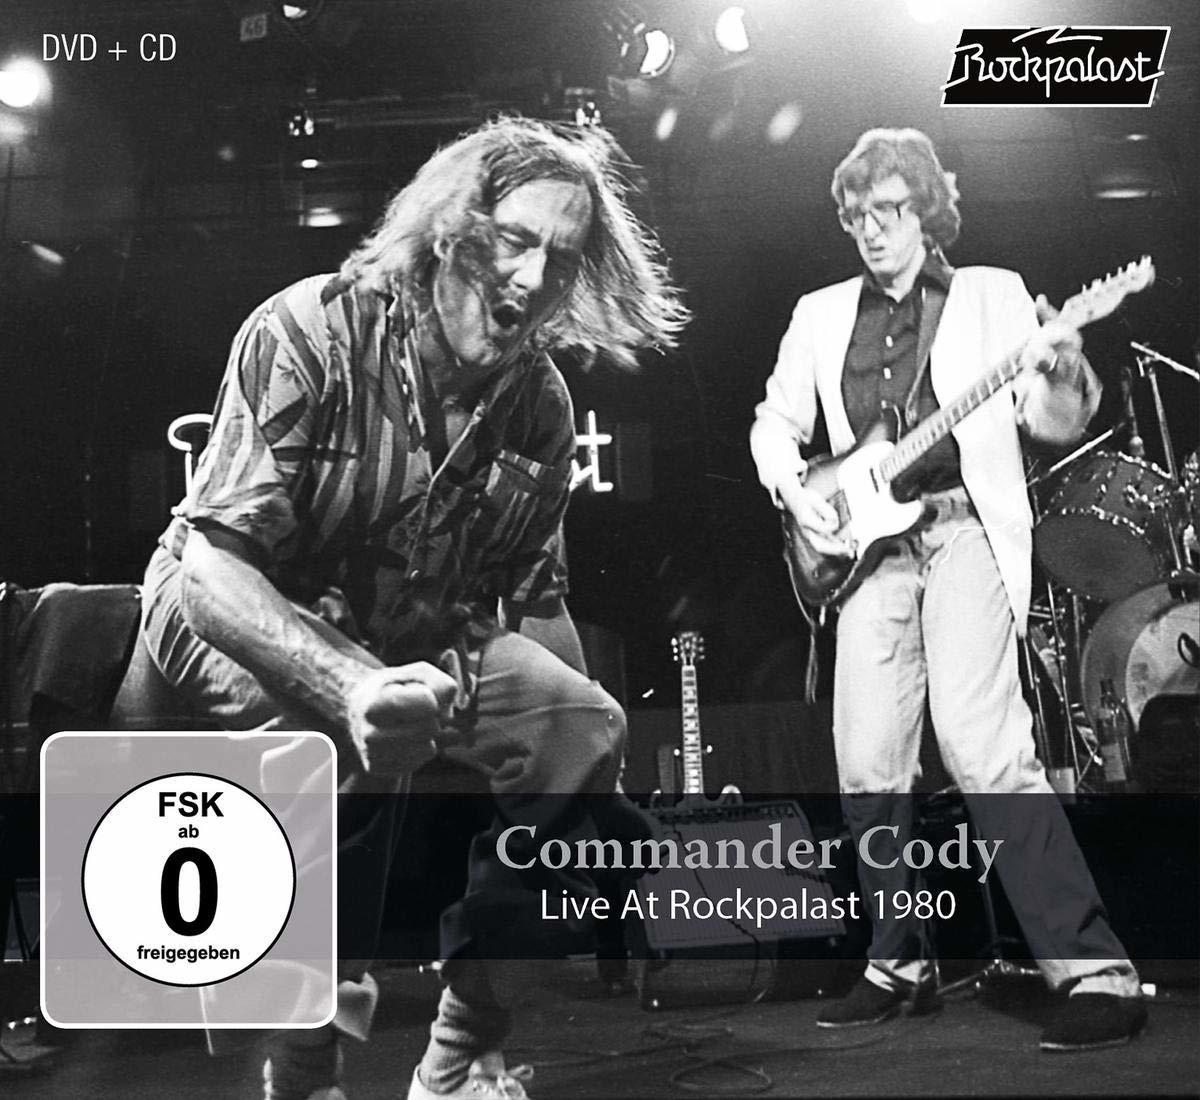 - Live Lost (CD Airmen 1980 His Video) Rockpalast and At Cody DVD Commander + - Planet